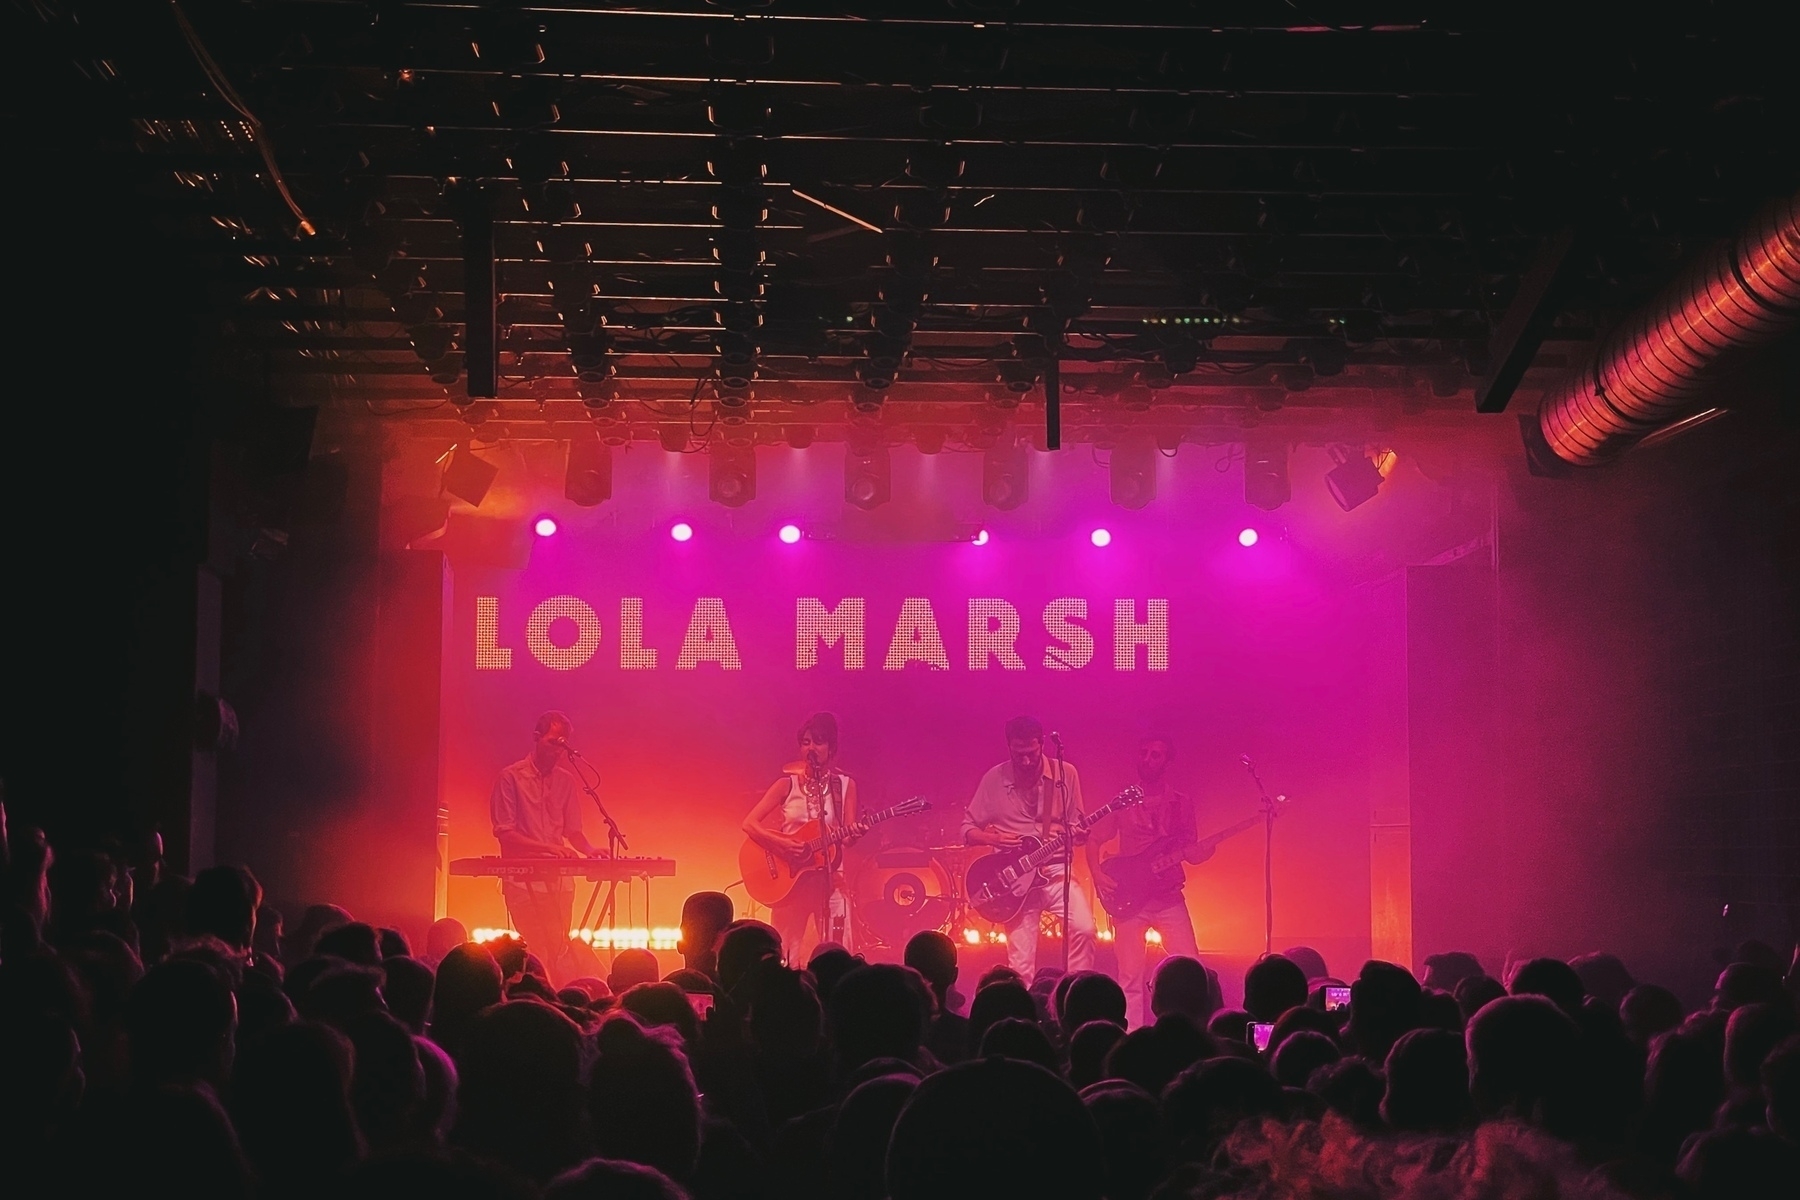 The band Lola Marsh on stage at Flex in Vienna, the singer is in the middle, on the left a keyboard player, guitar and bass player on the right and drums in the back. The light is pink-yellowish, in the back of the stage the band name is written. In the foreground the crowd is visible.